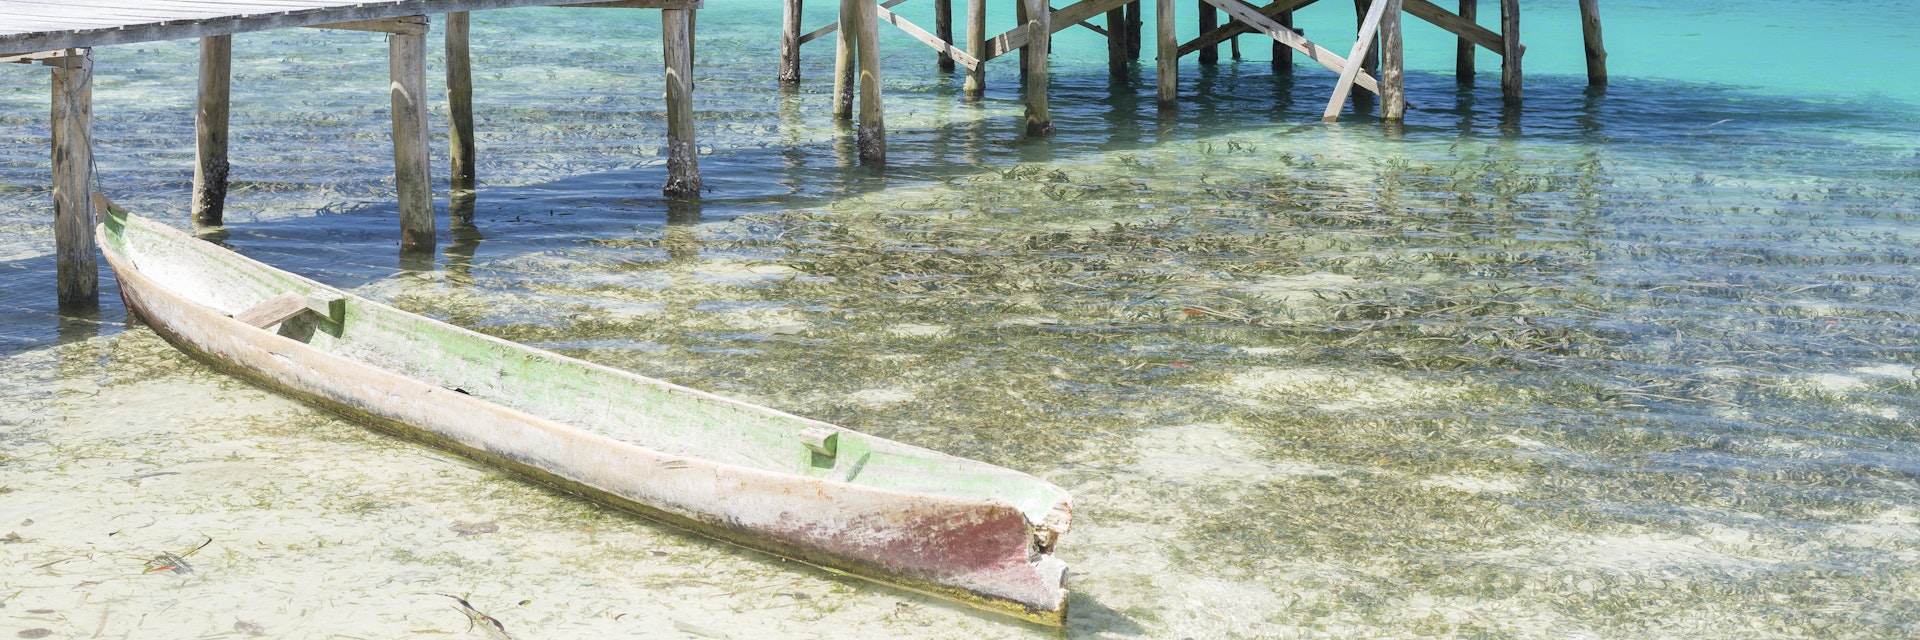 Wooden jetty in a tourist resort of the remote Togean Islands, Central Sulawesi, Indonesia.